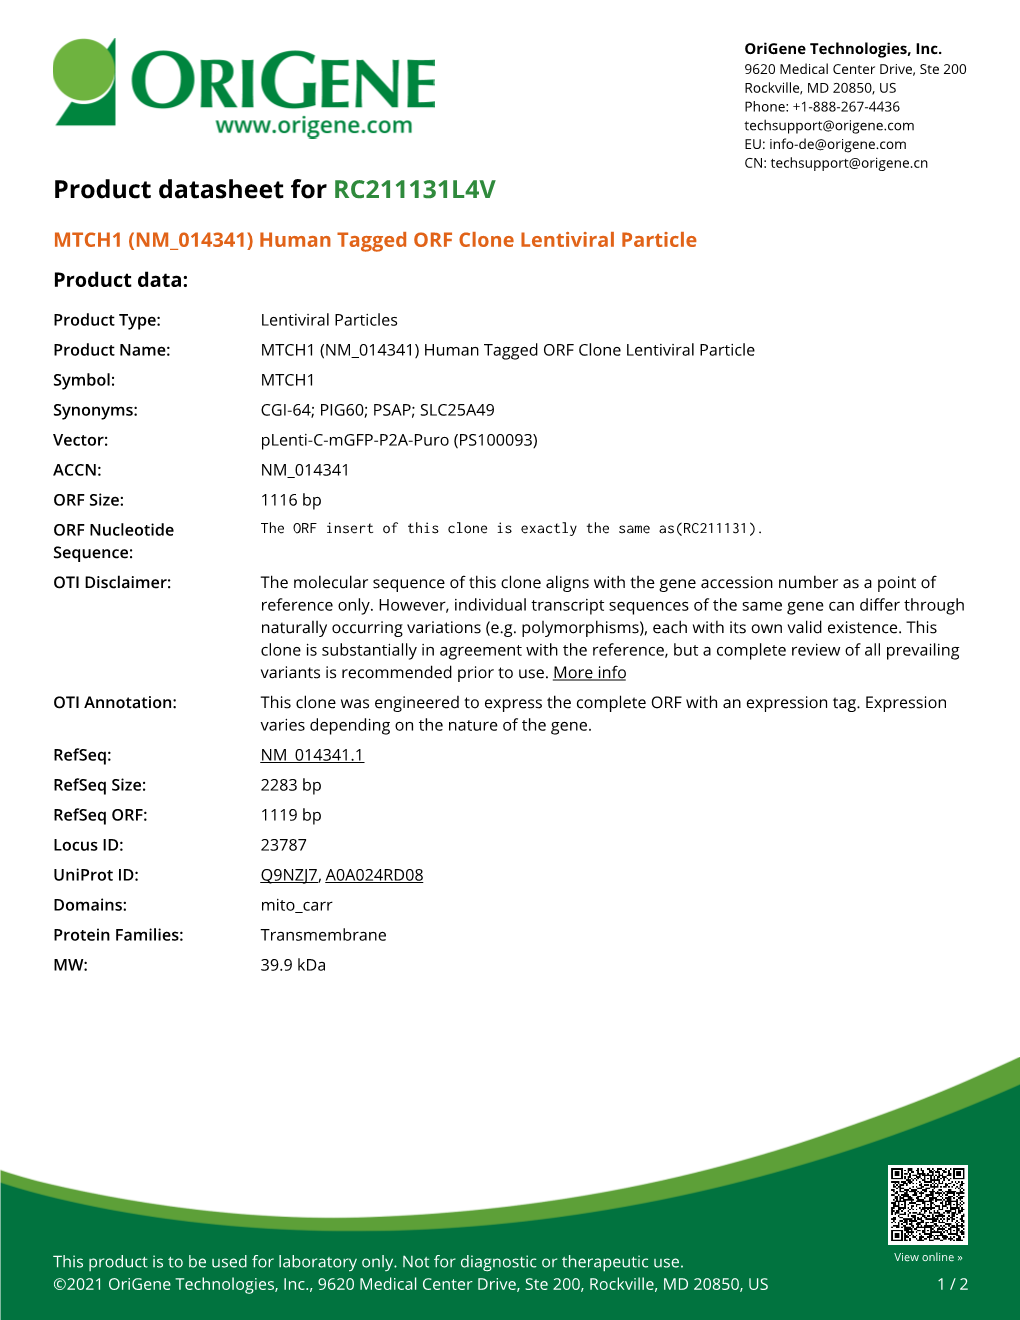 MTCH1 (NM 014341) Human Tagged ORF Clone Lentiviral Particle Product Data